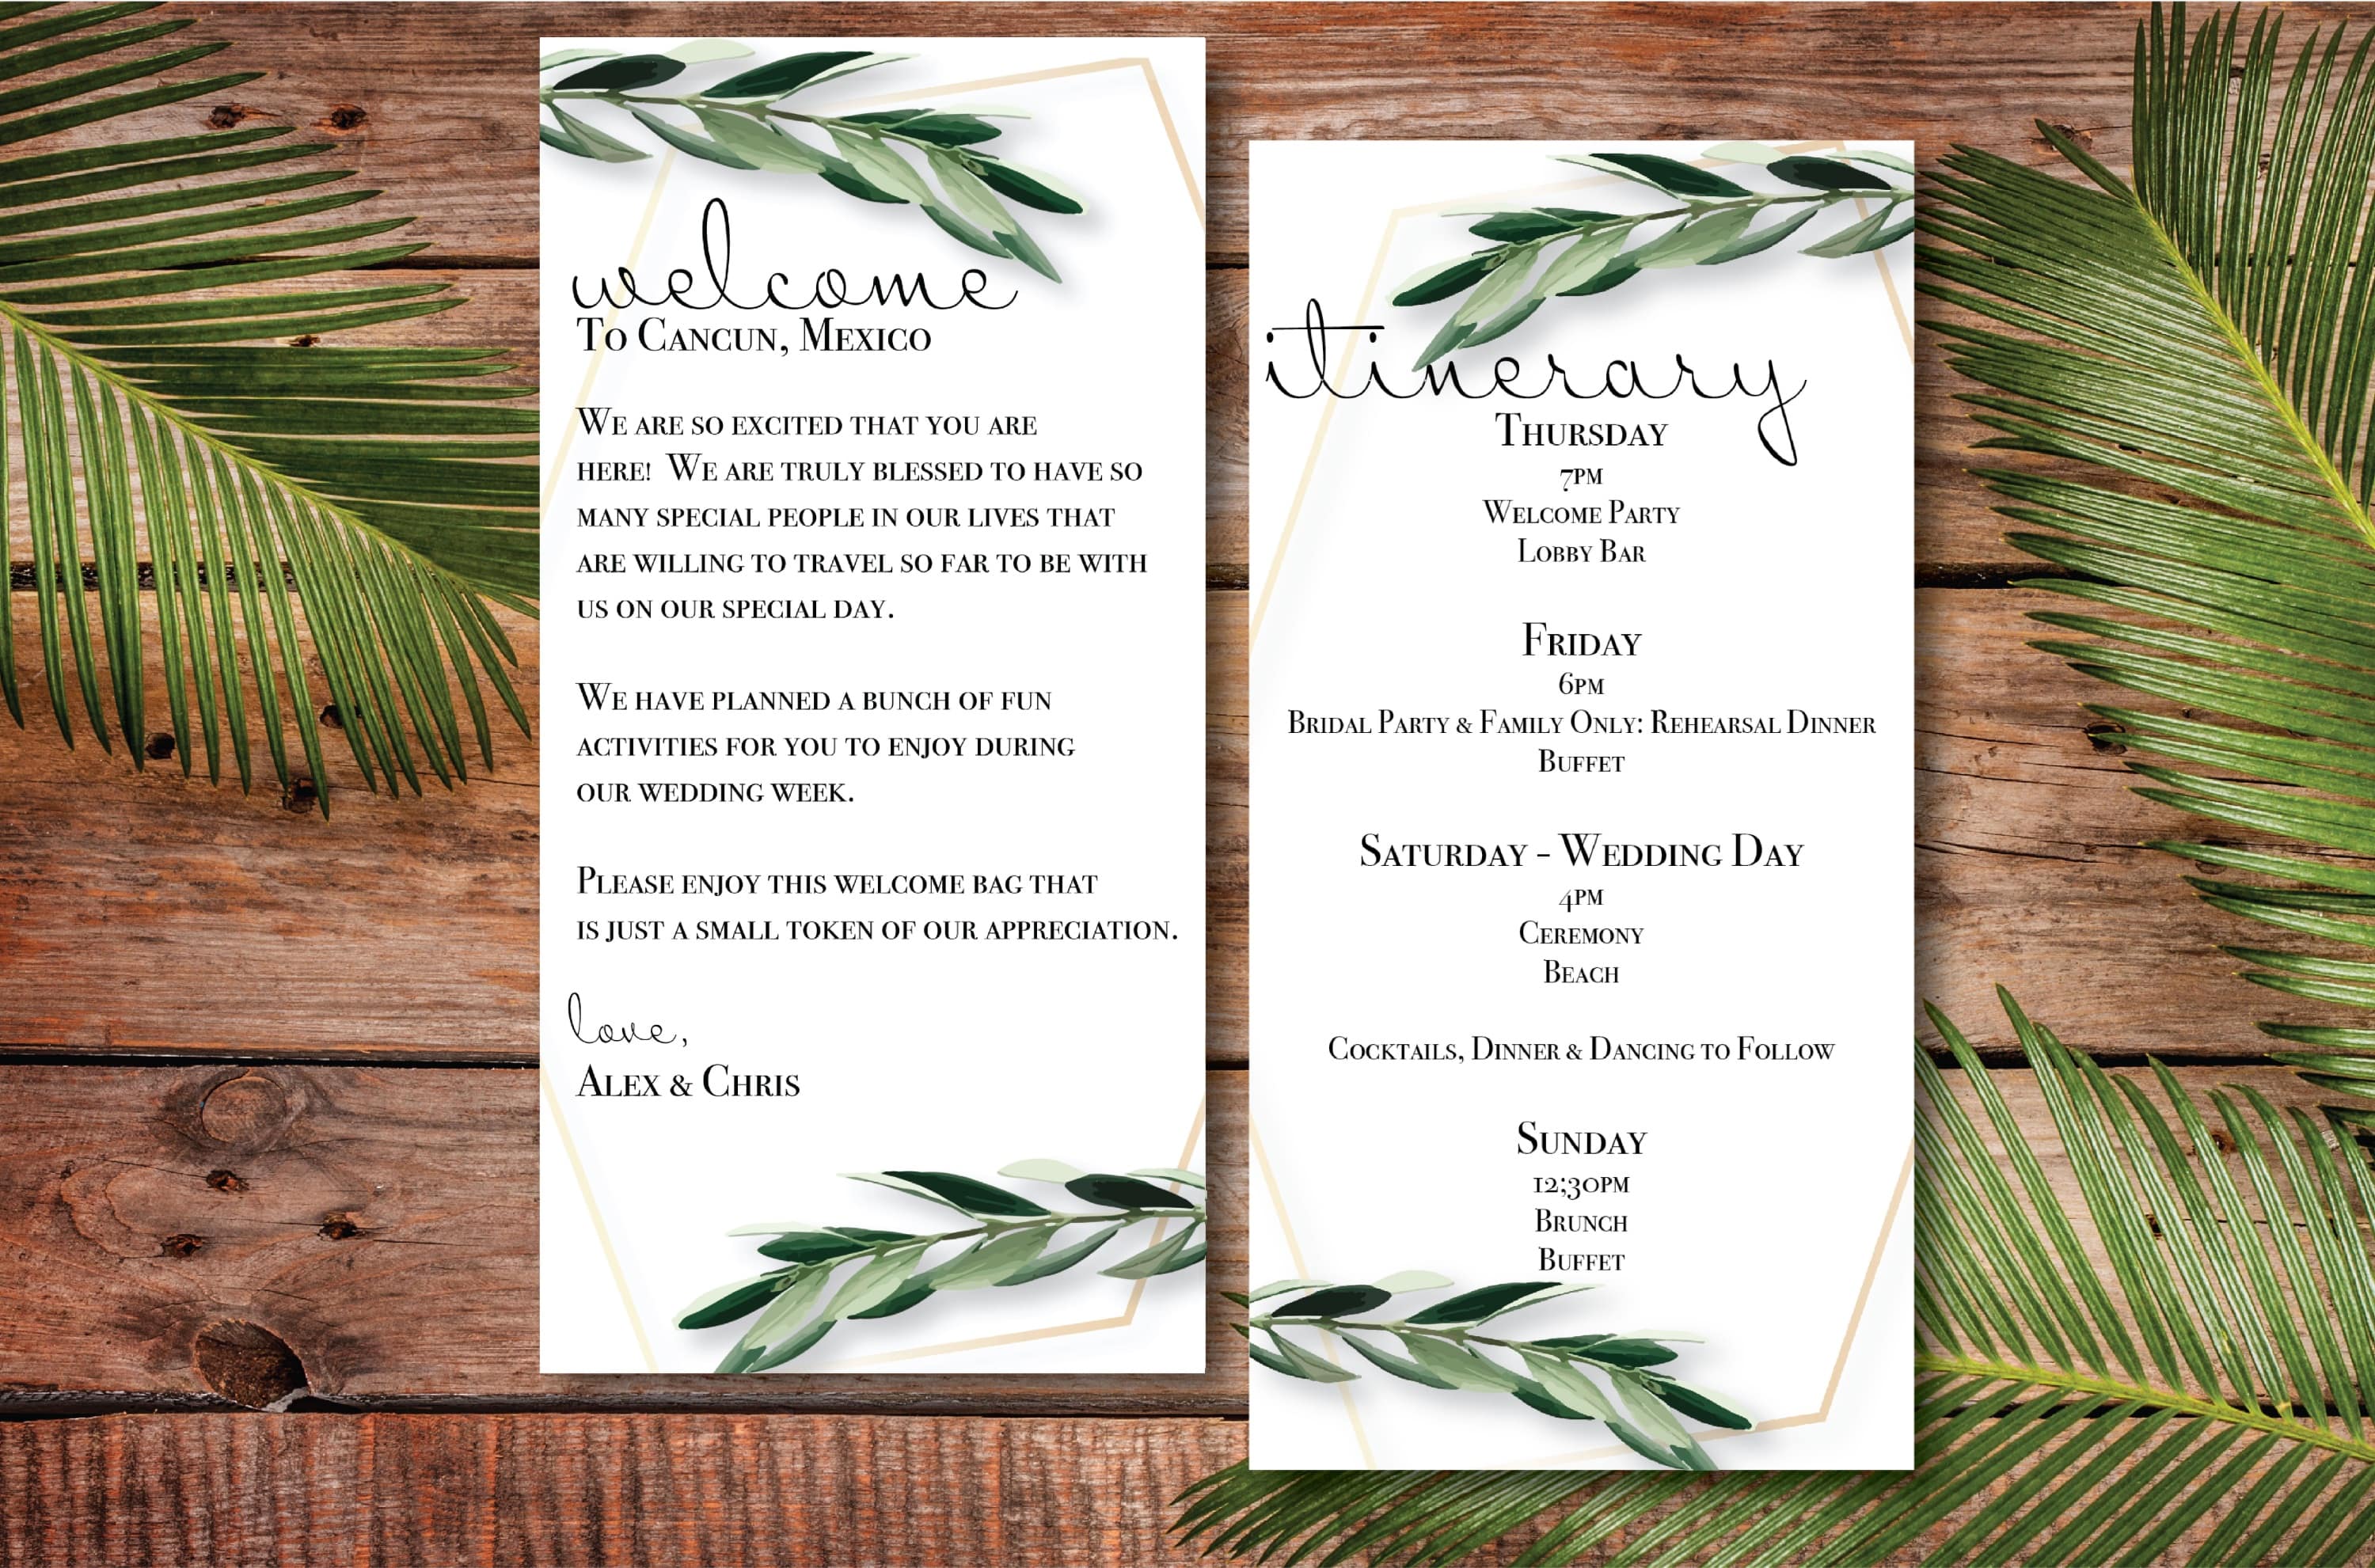 Greenery Destination Wedding Welcome Letter and Itinerary